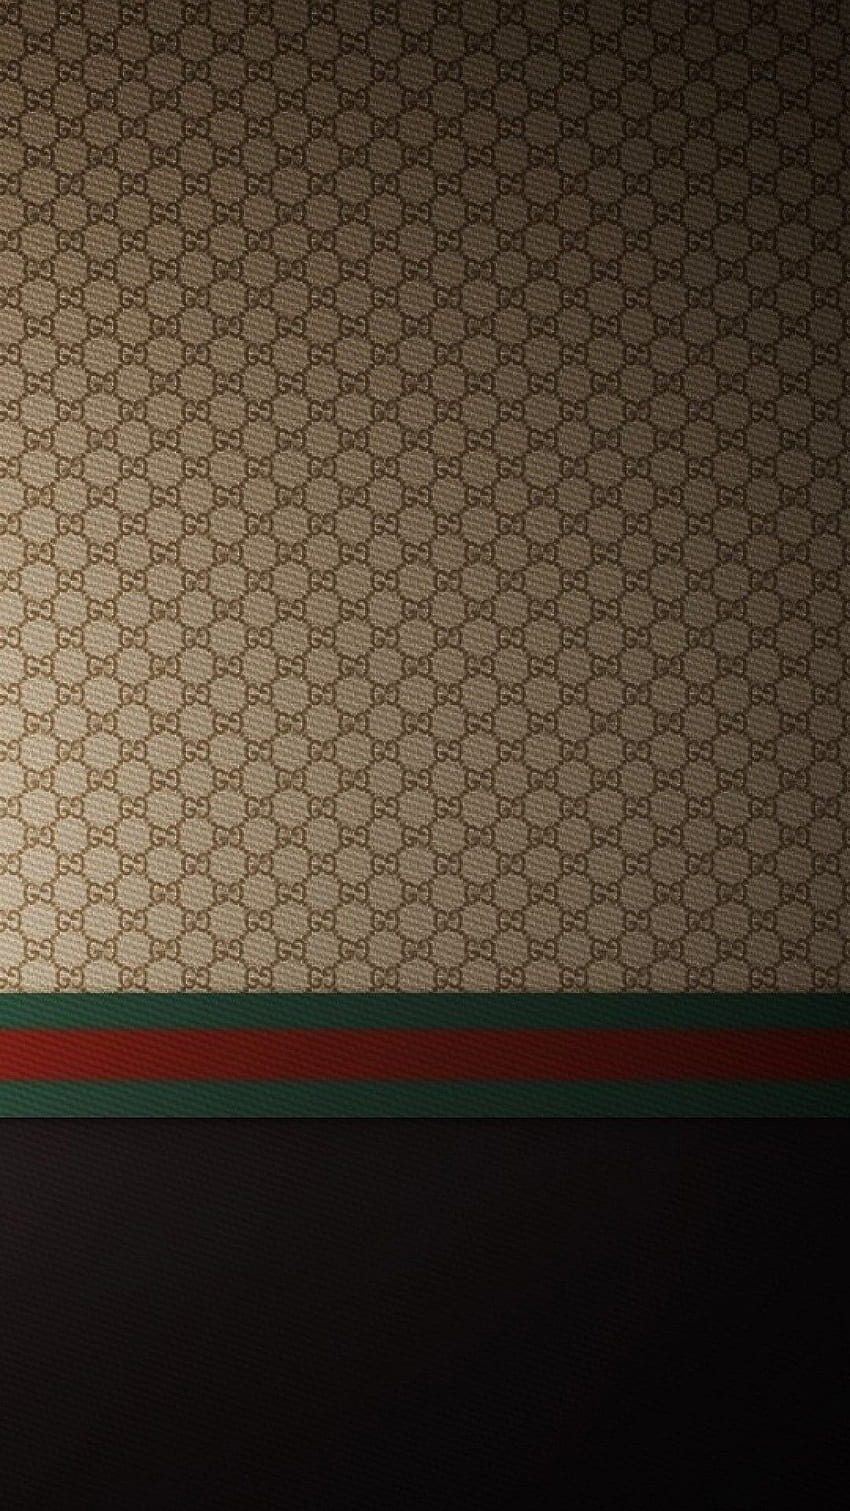 Gucci Wallpapers for iPhone Mobile 